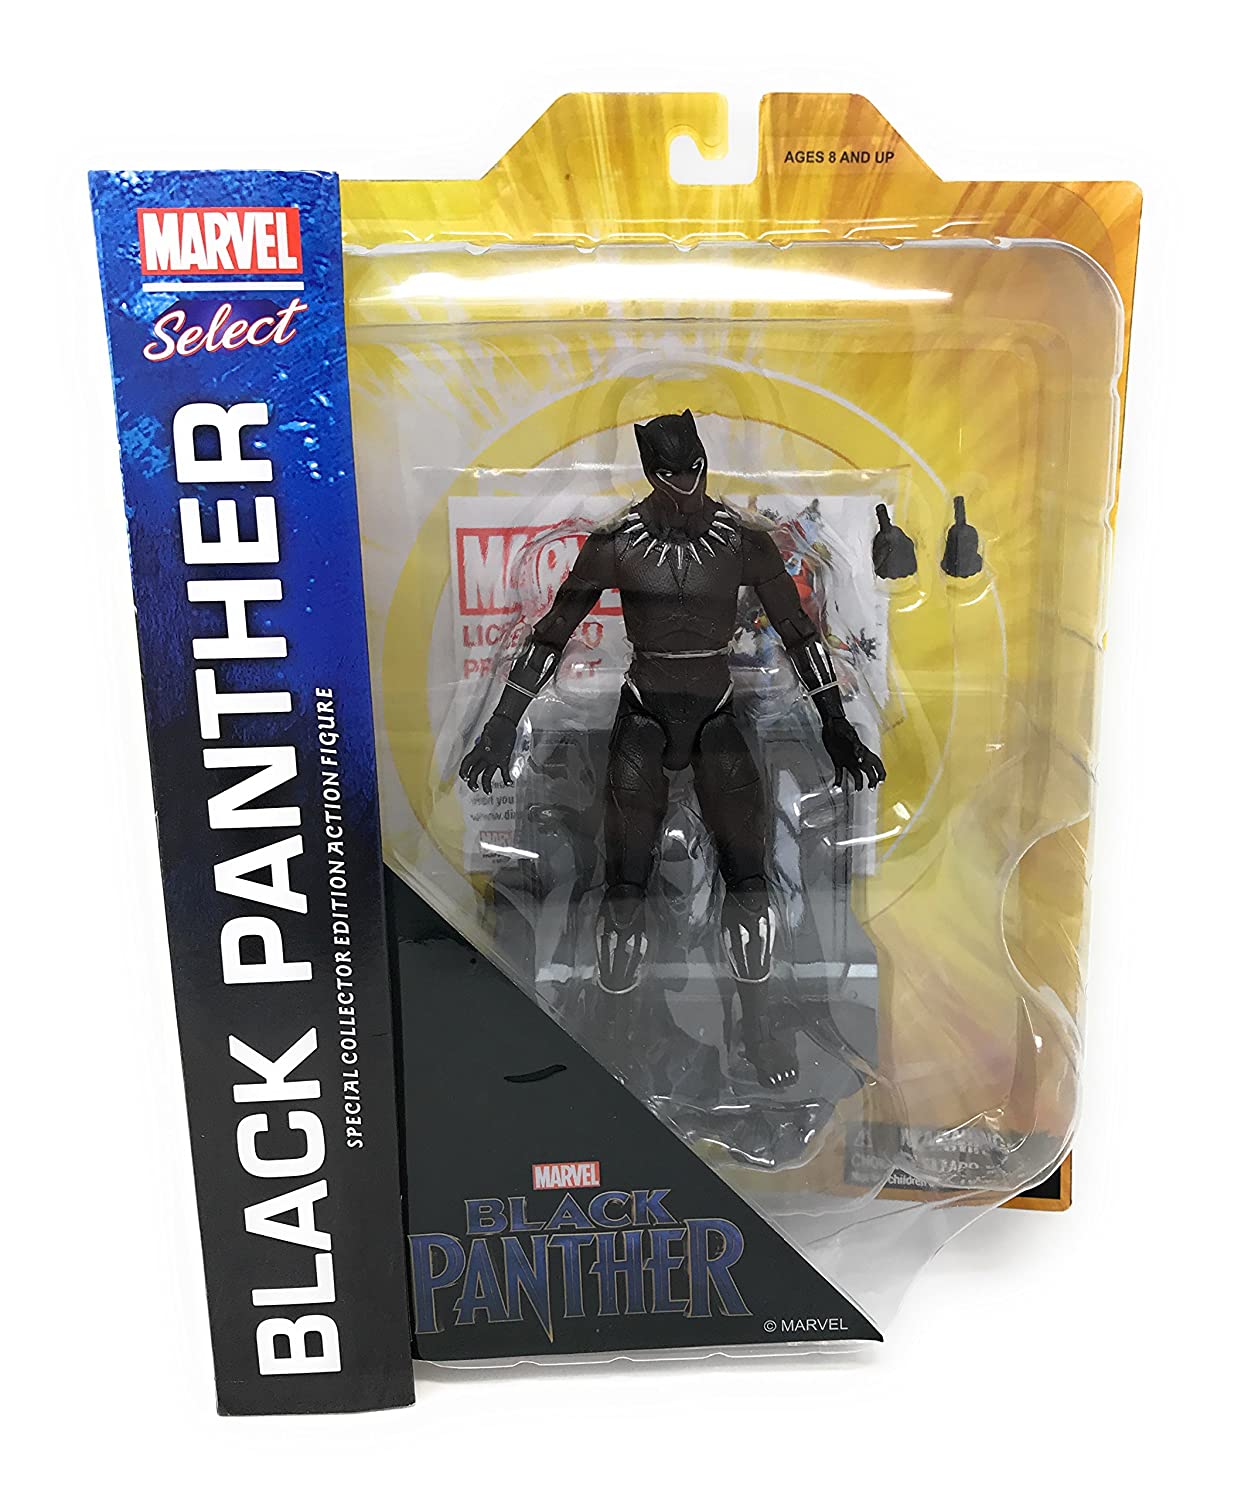 Marvel Select Black Panther Movie Action Figure